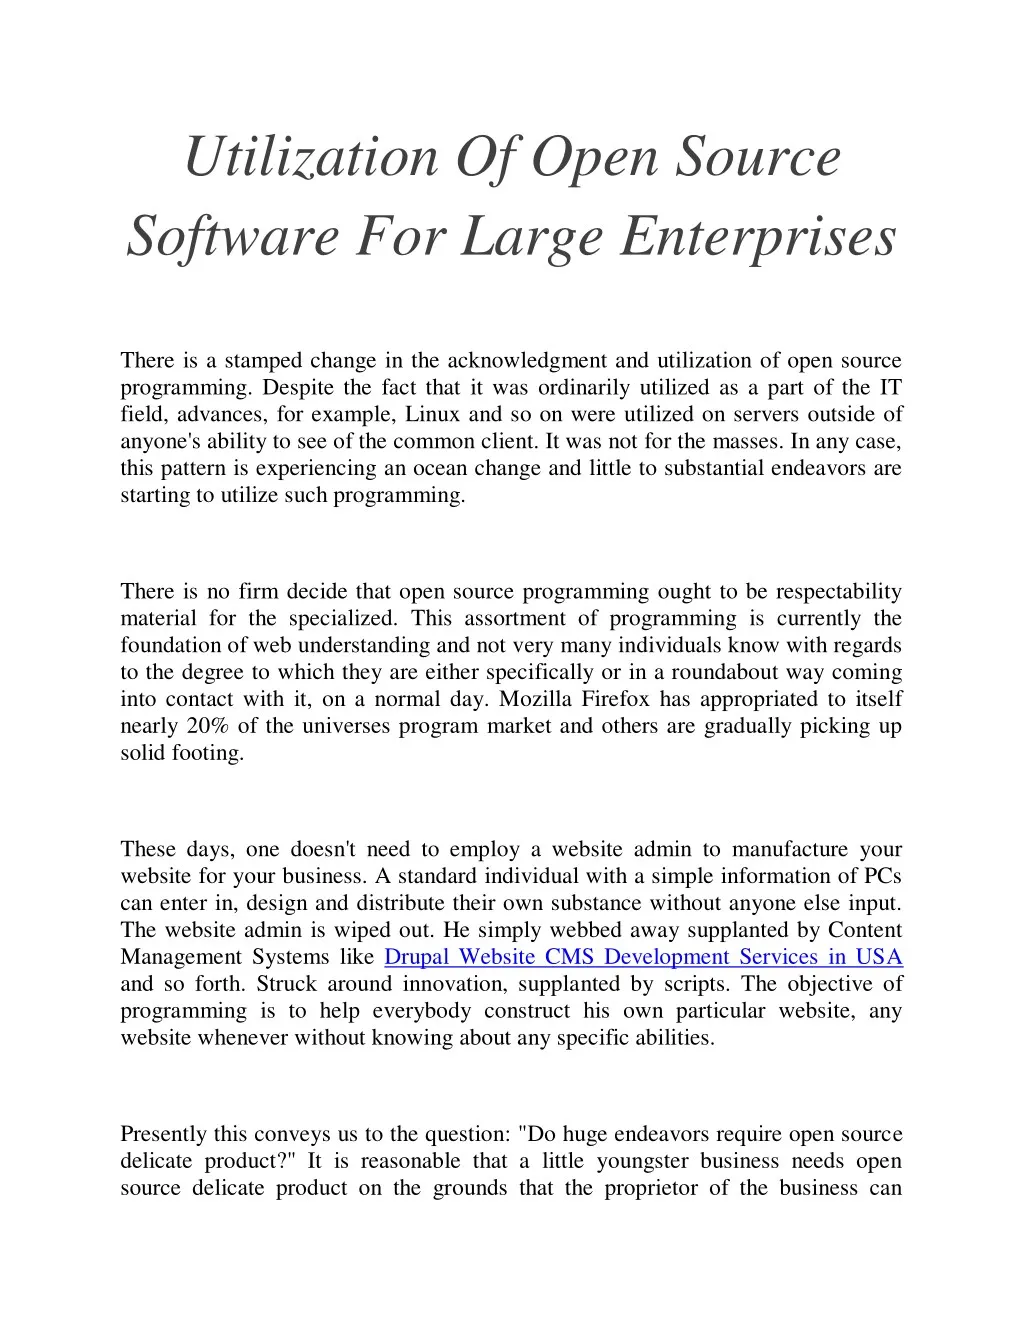 utilization of open source software for large